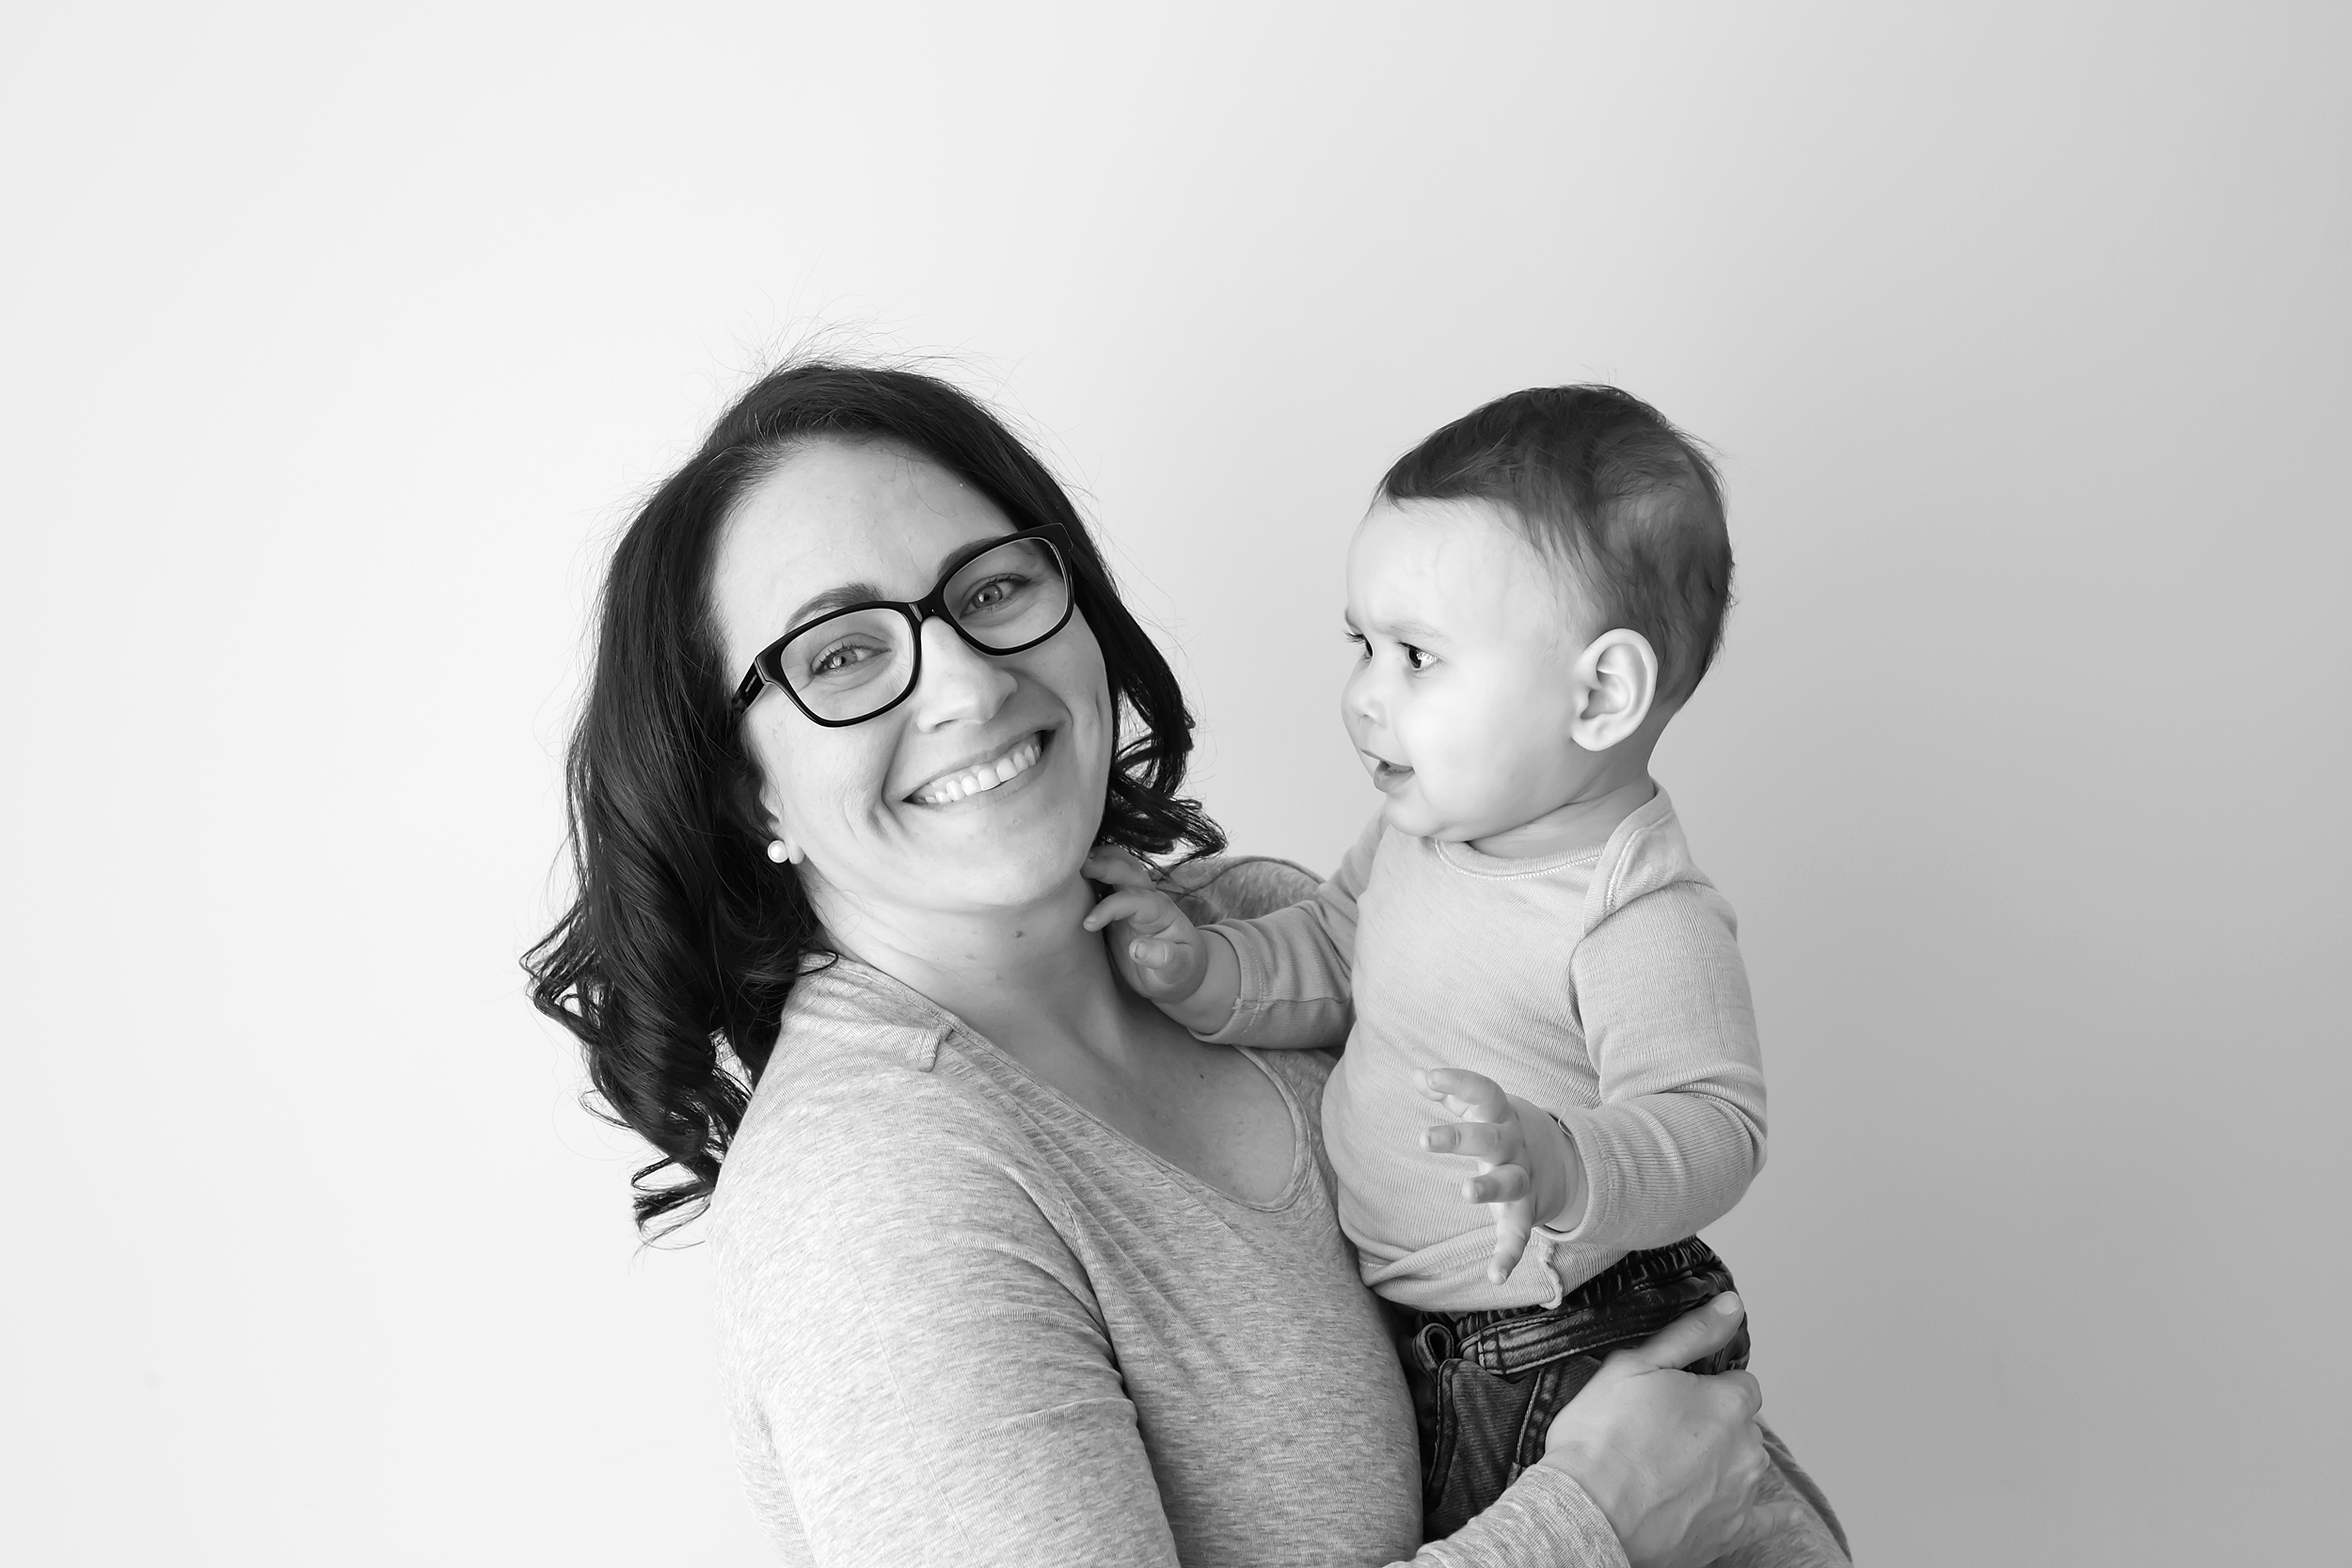 Mum holding her son in black and white at their family photography session in Melbourne natural light studio.